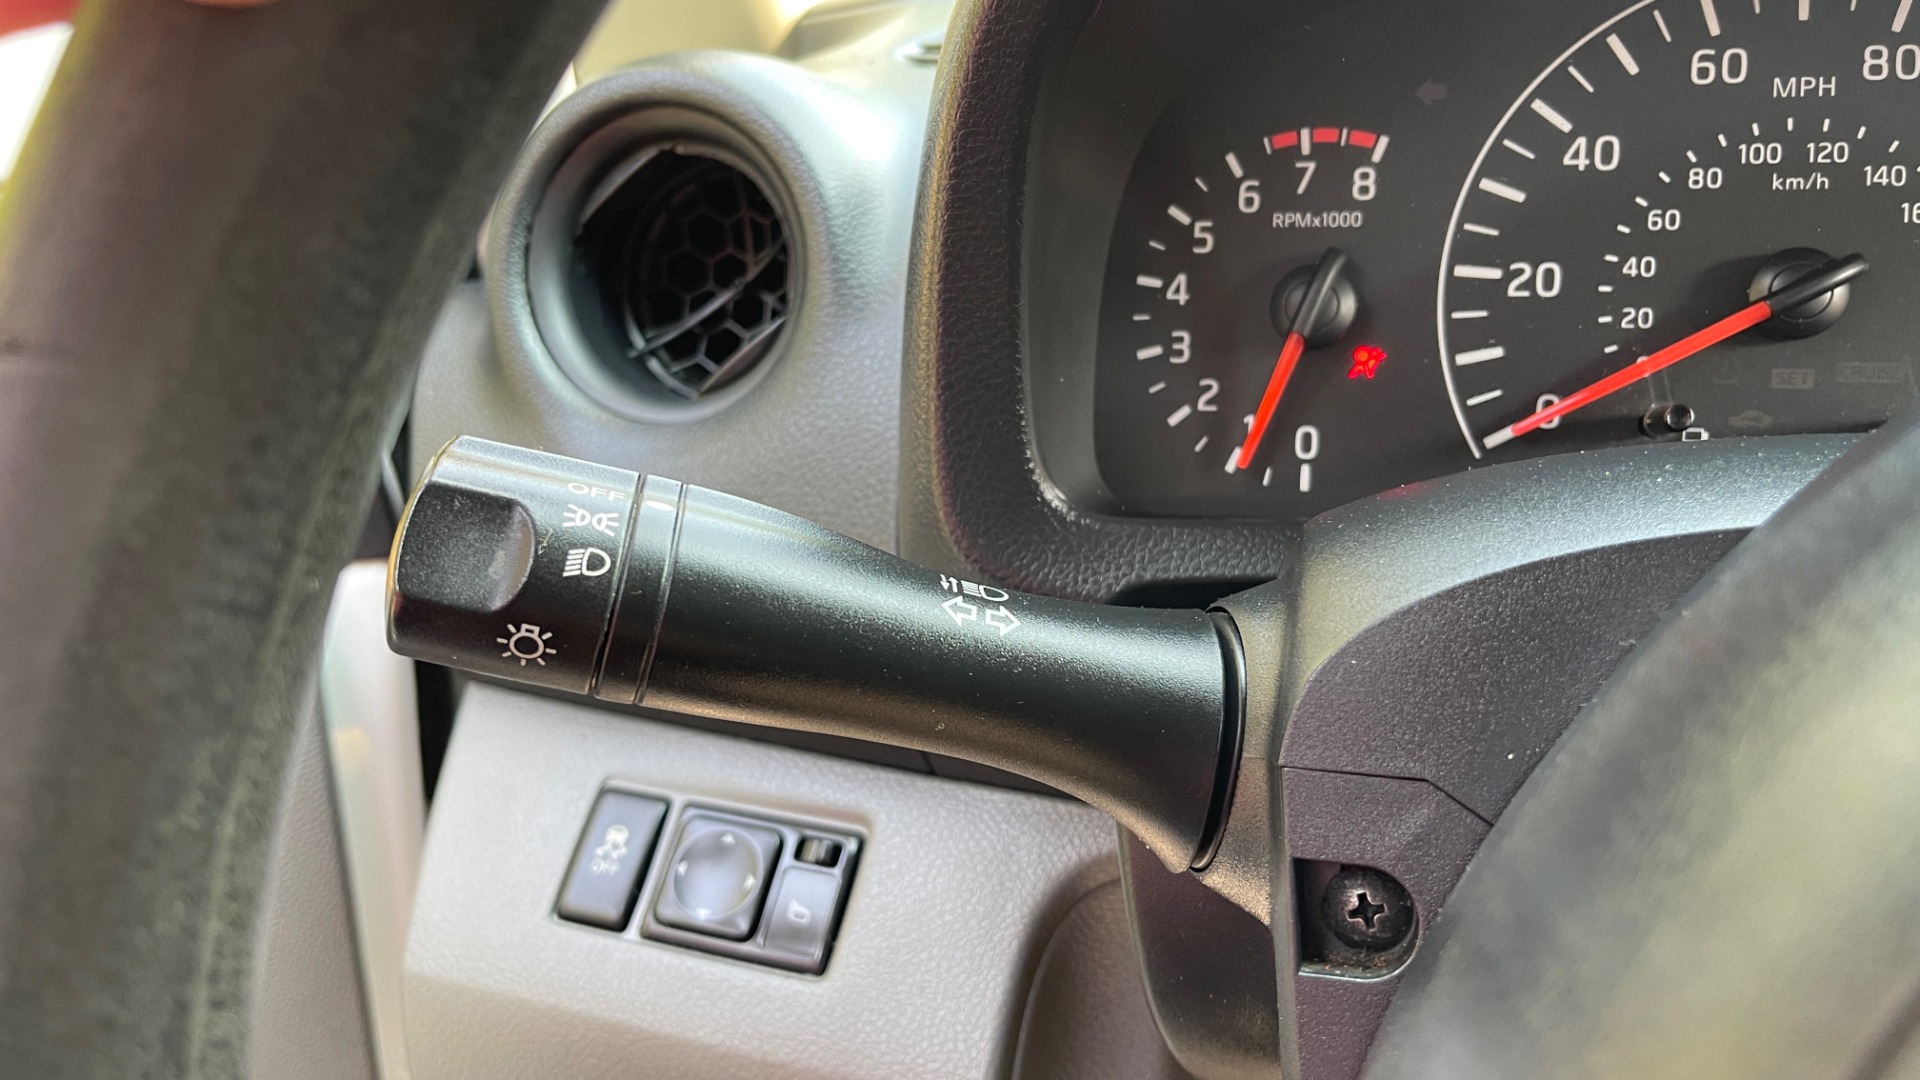 Nissan Nv200 Tpms Reset Button Location 